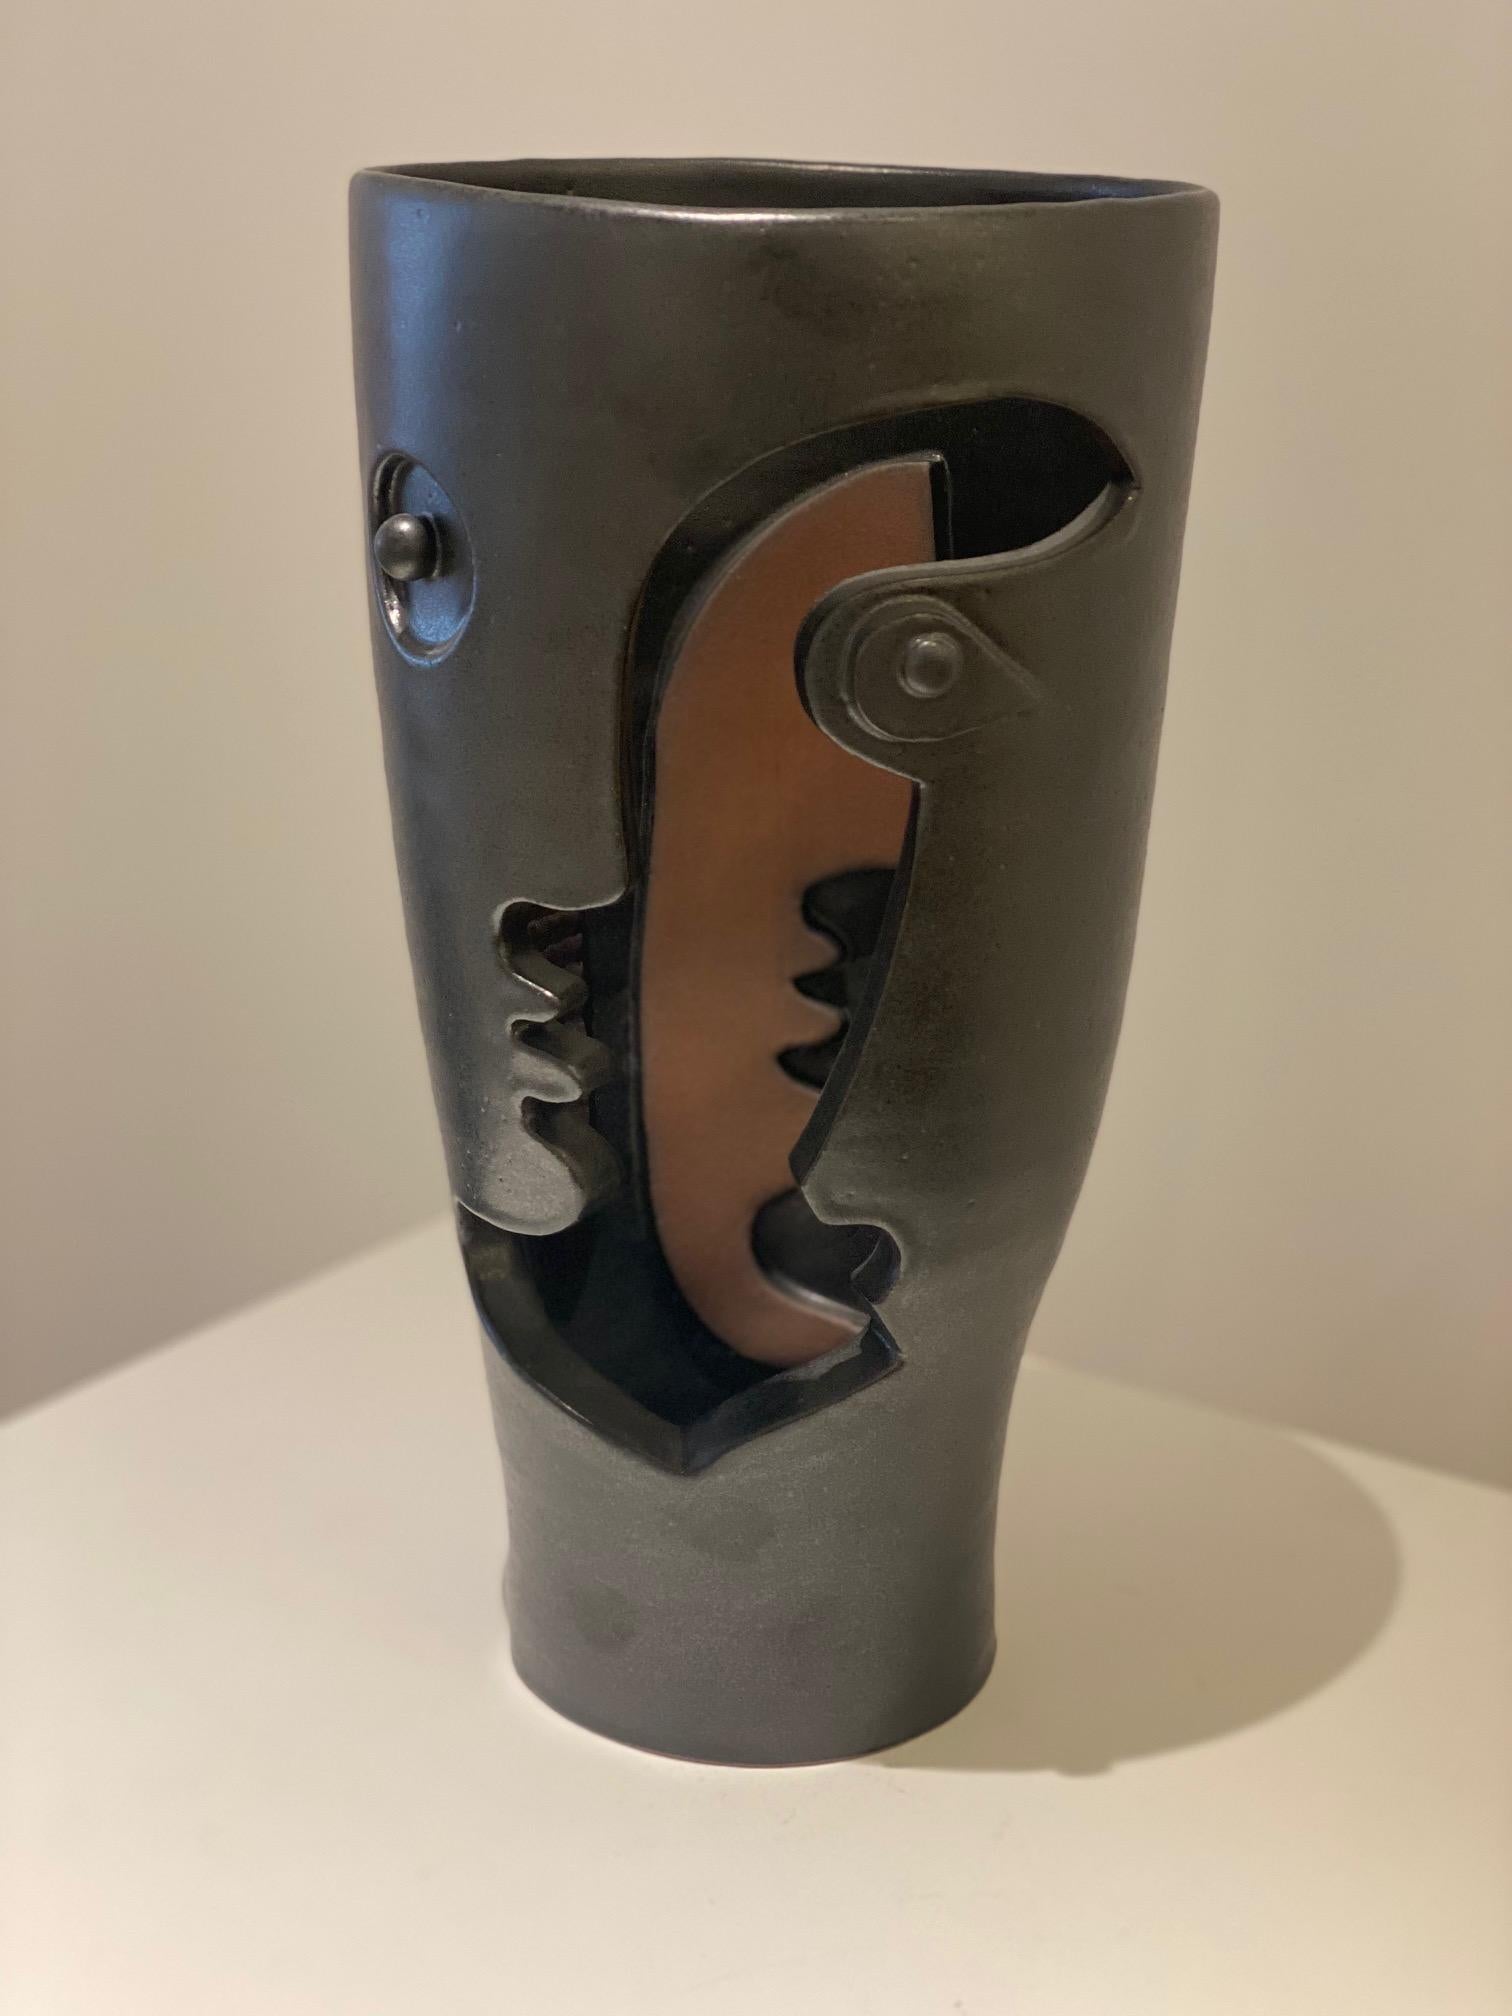 Decorative Sculpture vase in clay with stylized face, handmade and signed by French ceramicists Dalo.
Earthenware with satin black enamels. One of a kind.
Measures: H 30 cm x L 15 cm.

